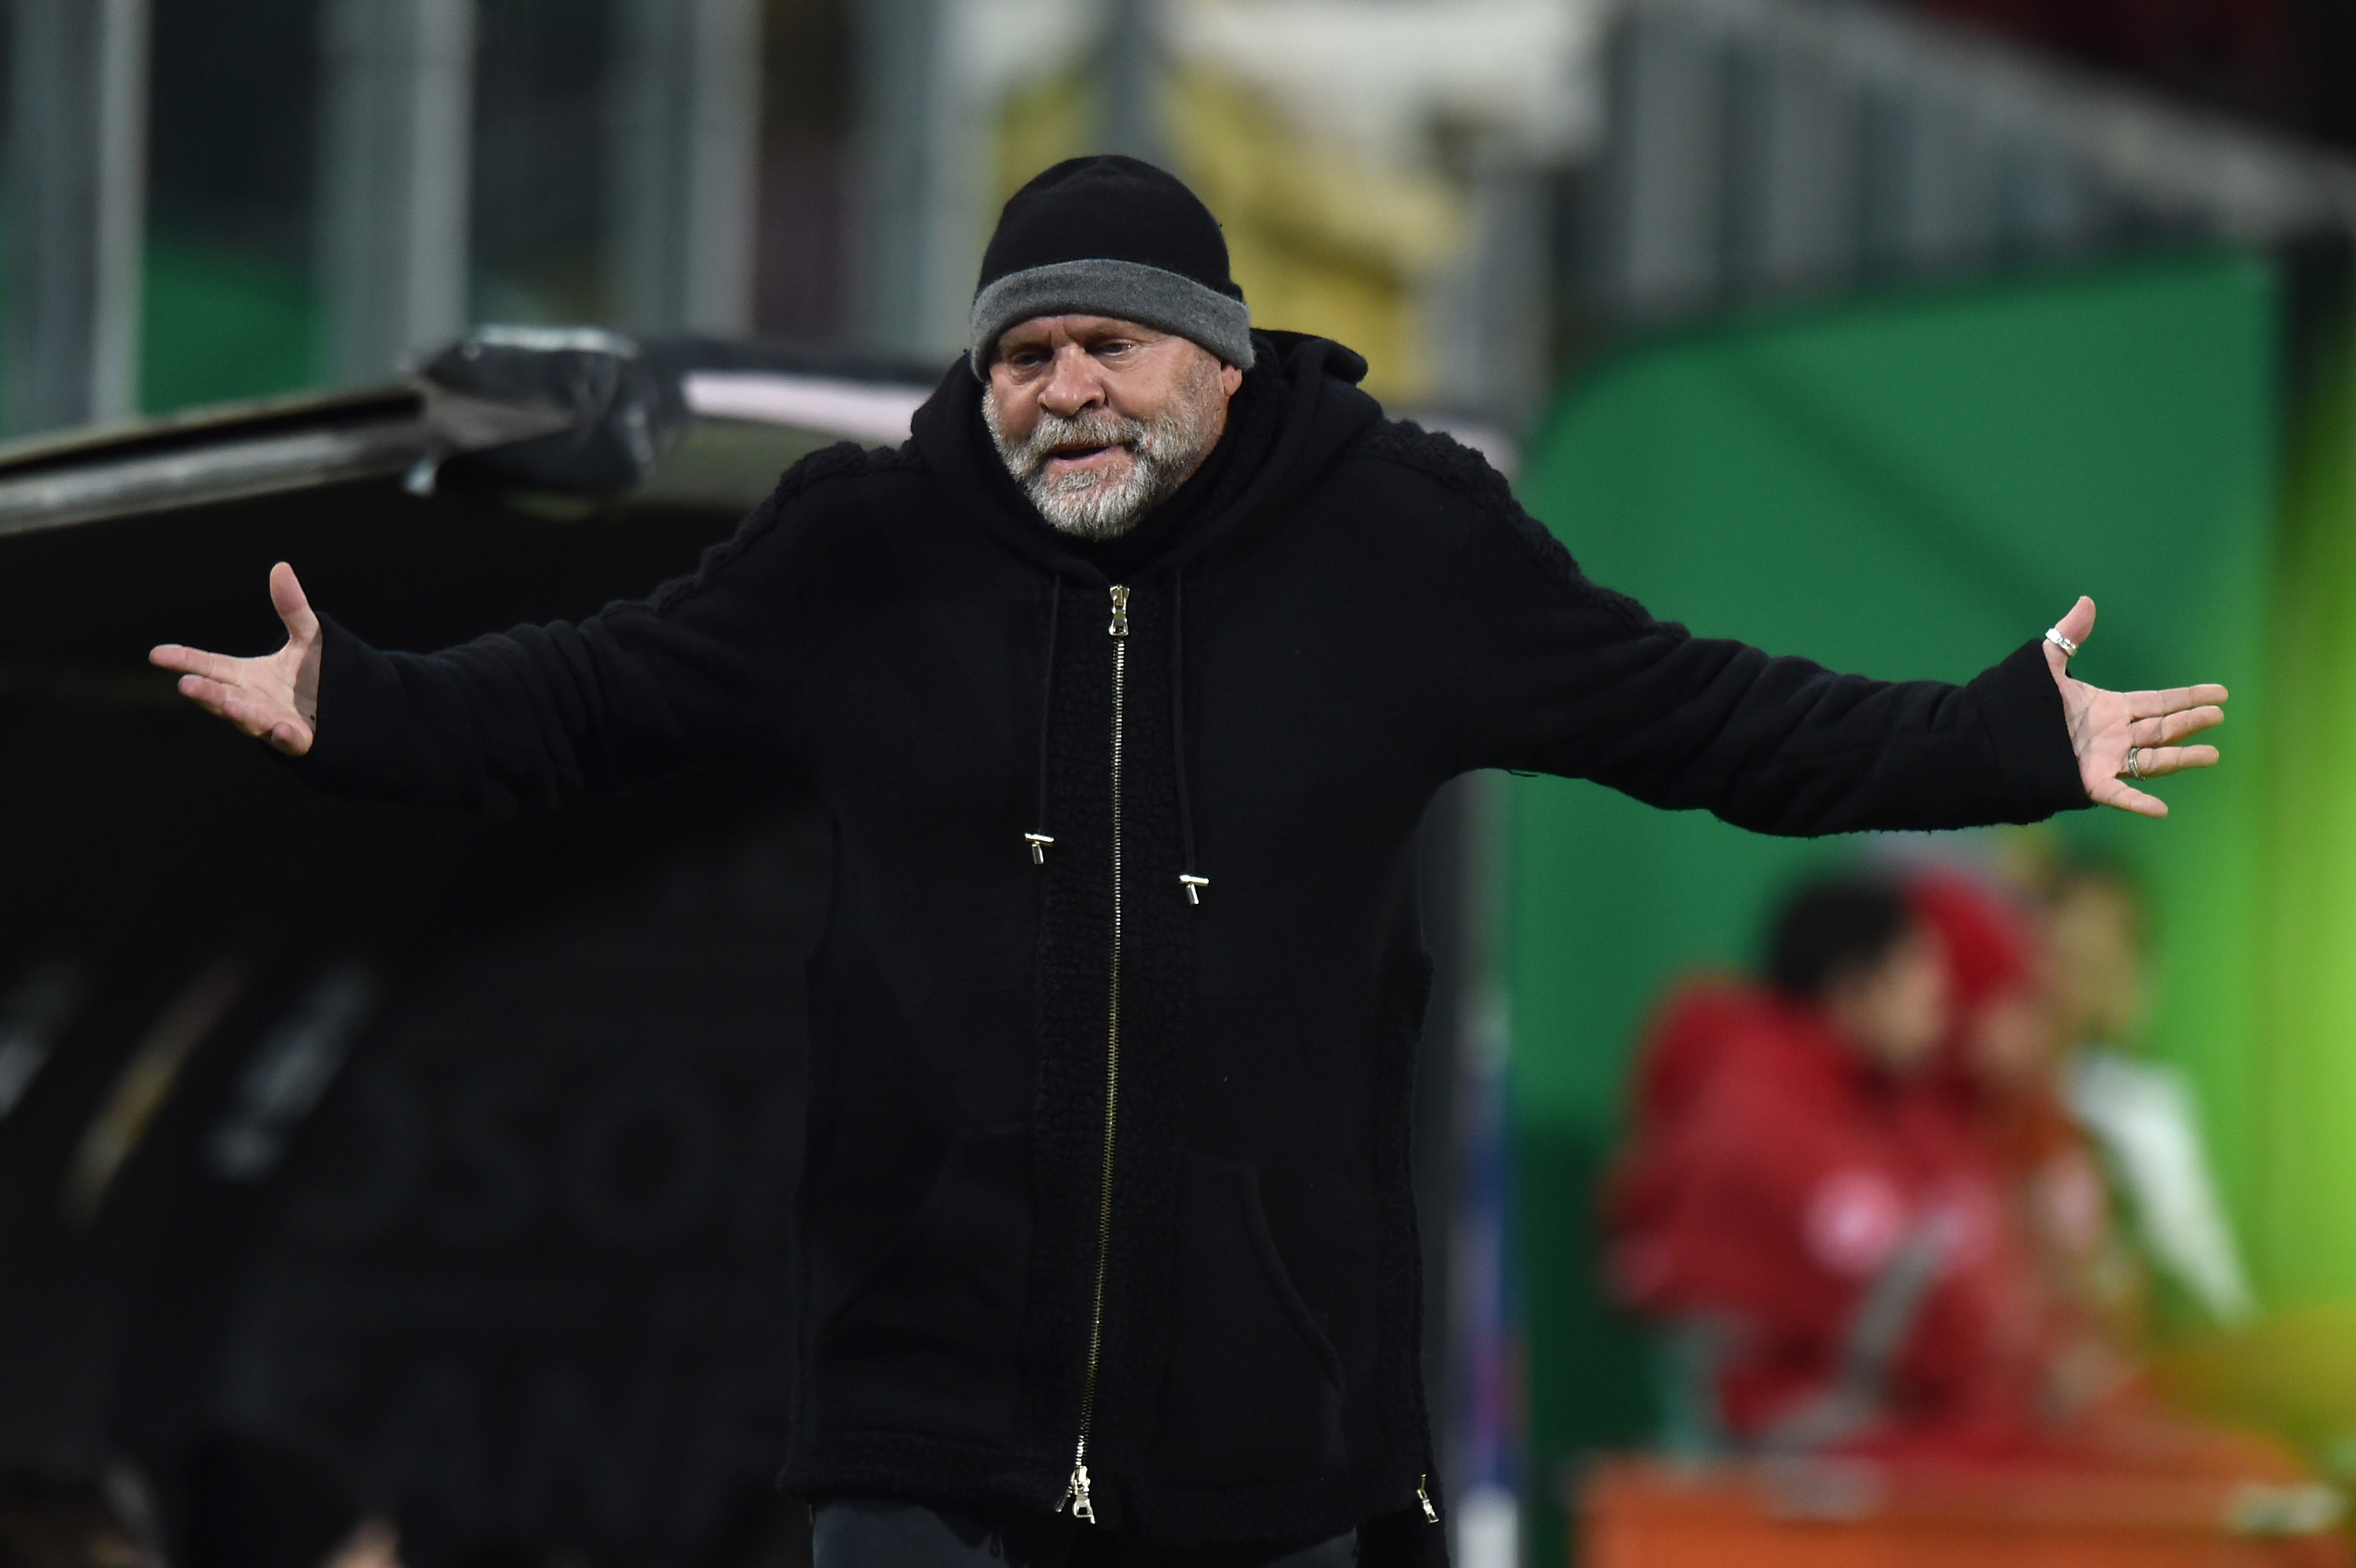 PALERMO, ITALY - FEBRUARY 27:  Head coach Serse Cosmi of Ascoli reacts during the Serie B match between US Citta di Palermo and Ascoli Picchio on February 27, 2018 in Palermo, Italy.  (Photo by Tullio M. Puglia/Getty Images)